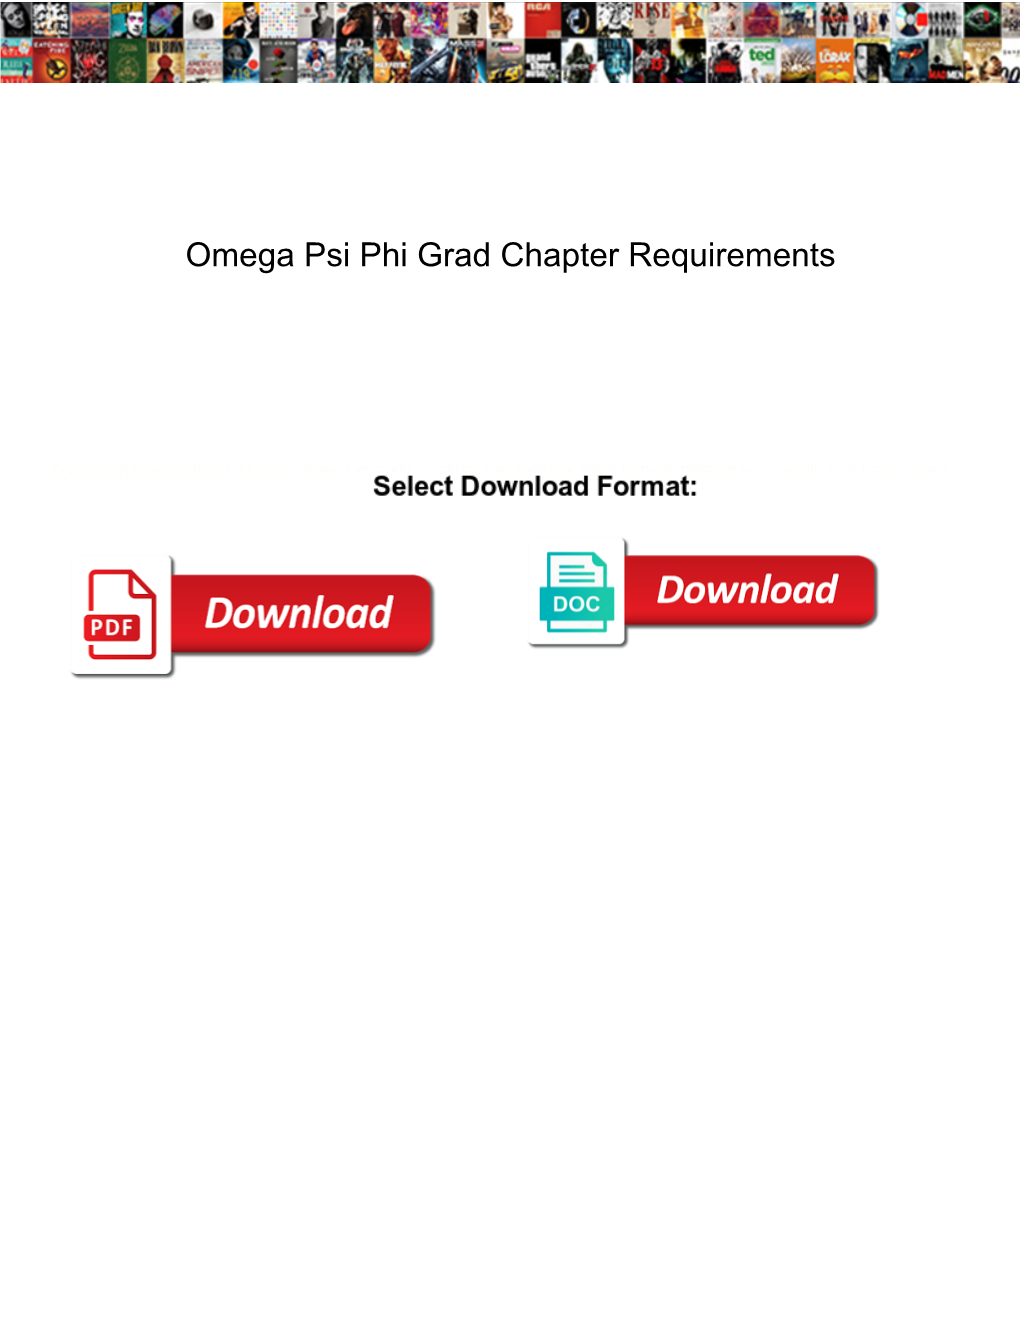 Omega Psi Phi Grad Chapter Requirements